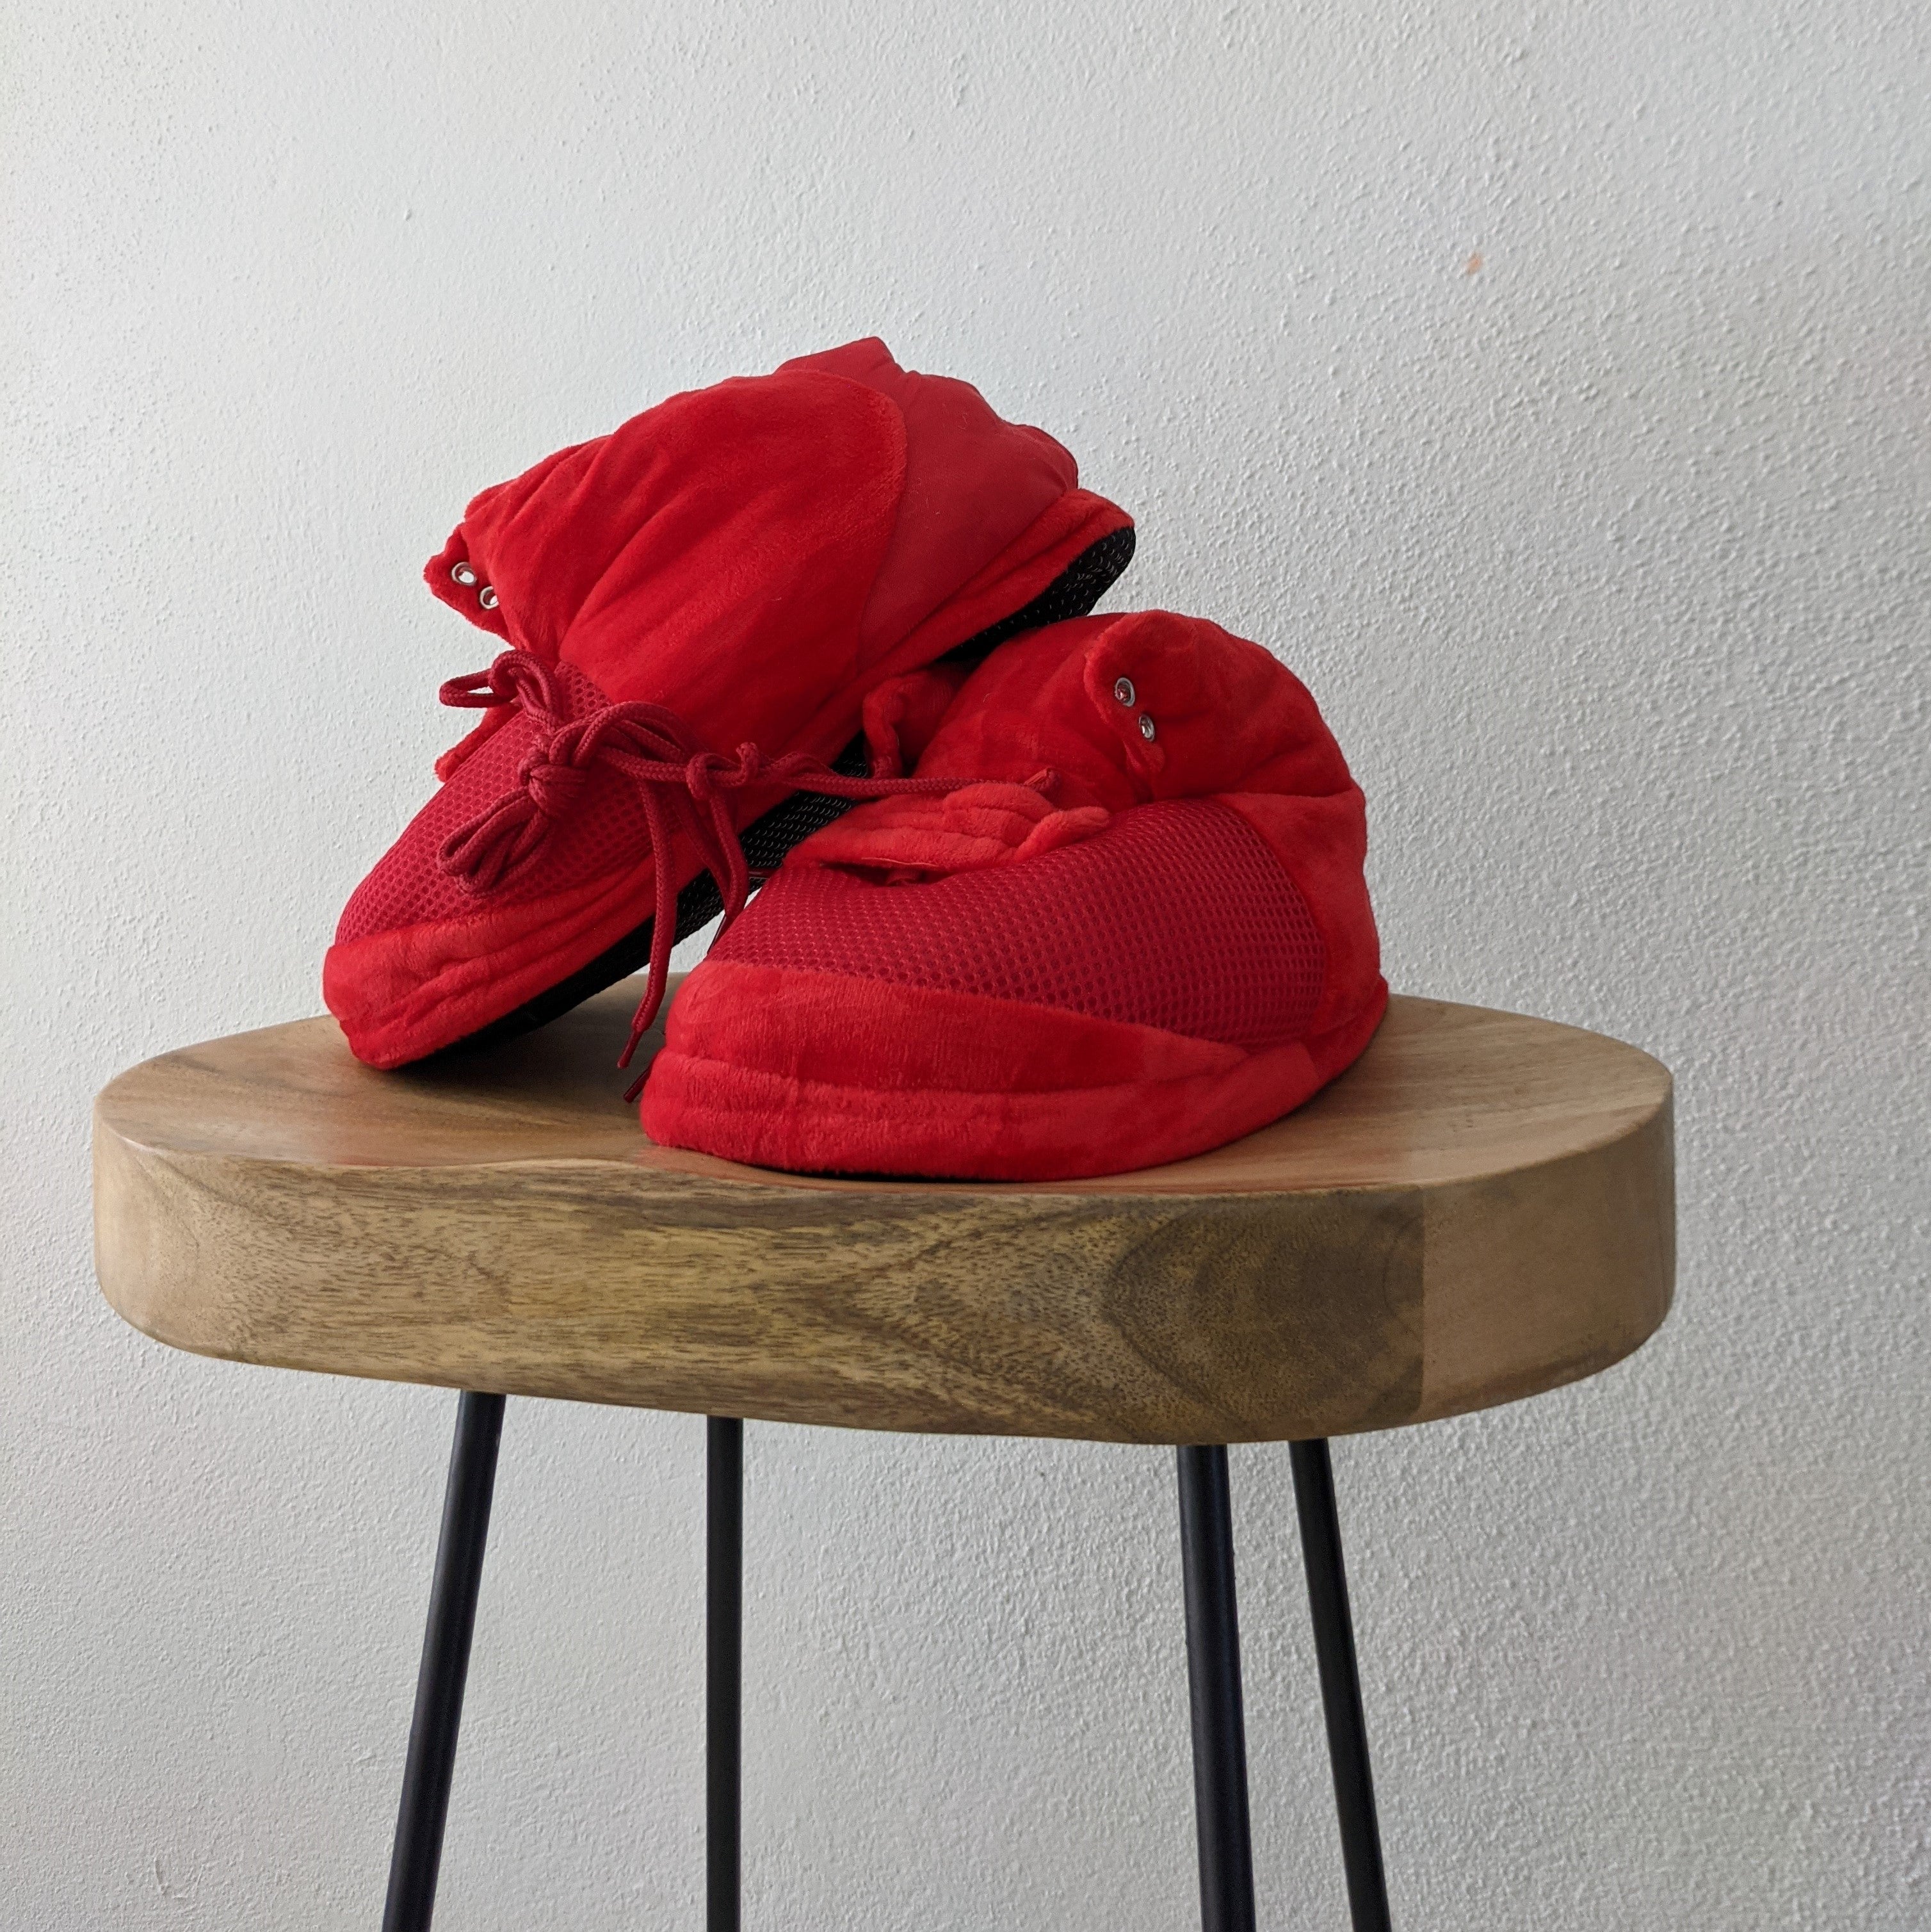 Mexico bidragyder At opdage Air Yeezy 2 Red October Inspired Plush Slippers – Kicks Zen